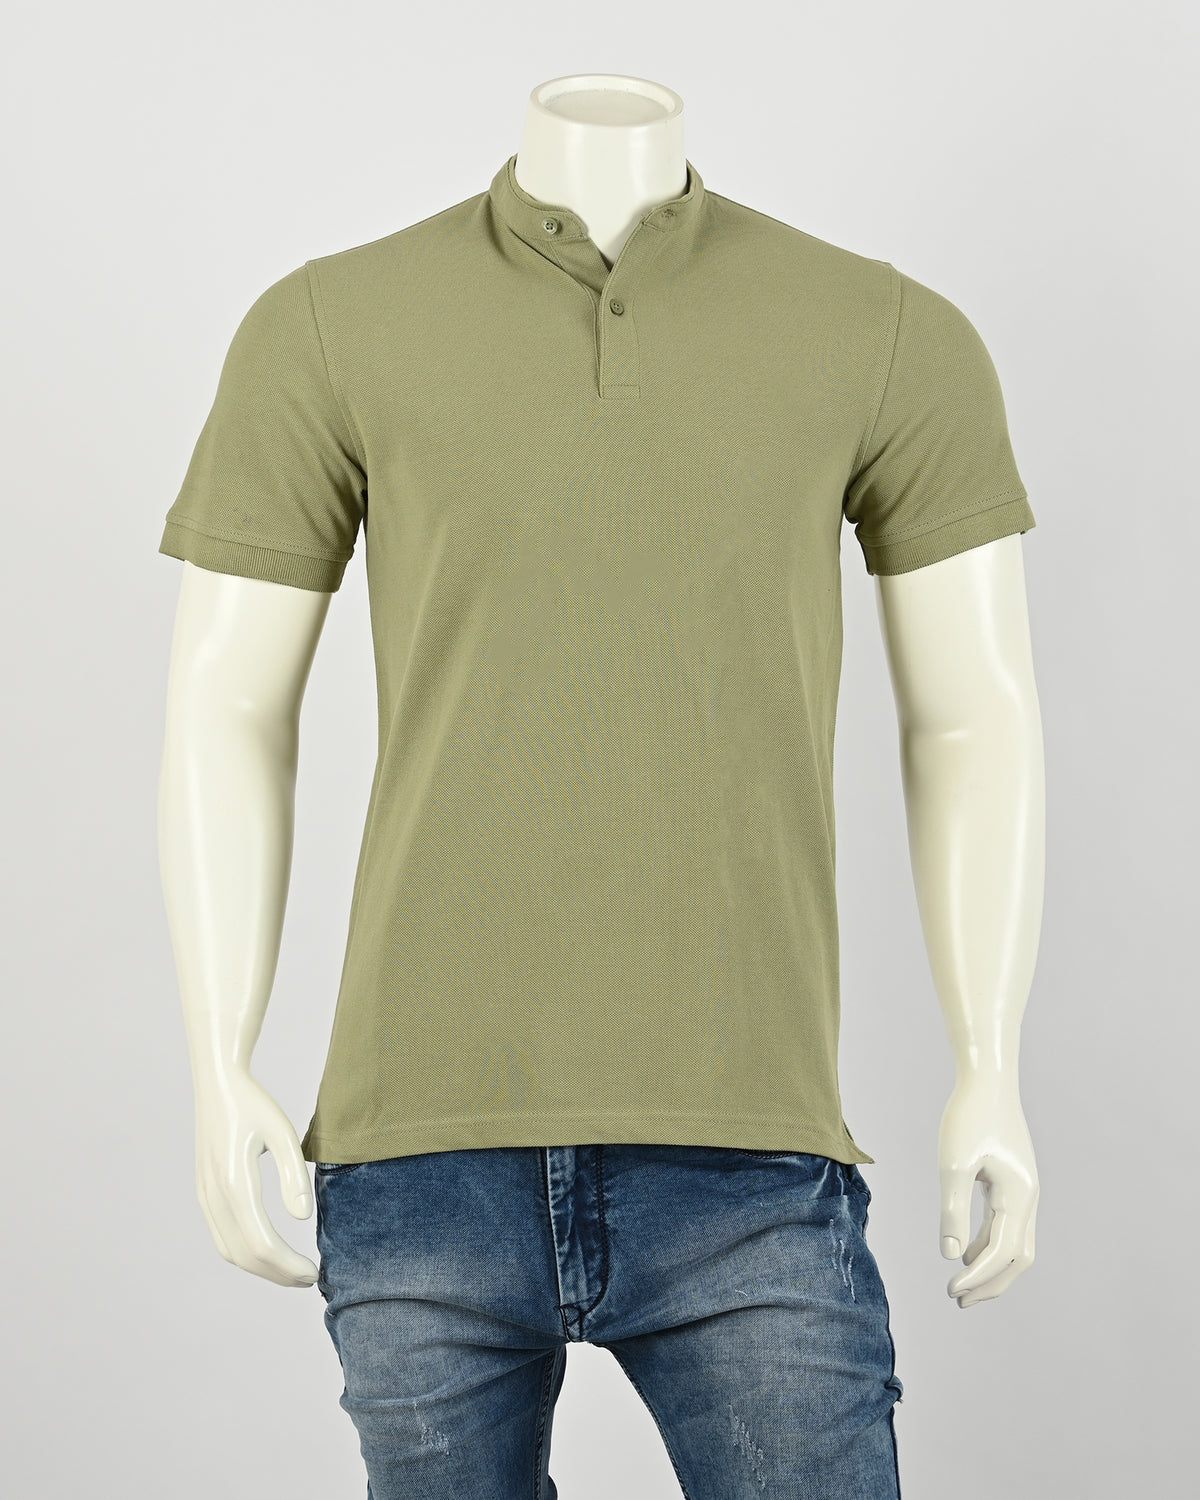 Solid Knit T-Shirt with Mandarin Collar and Short Sleeves